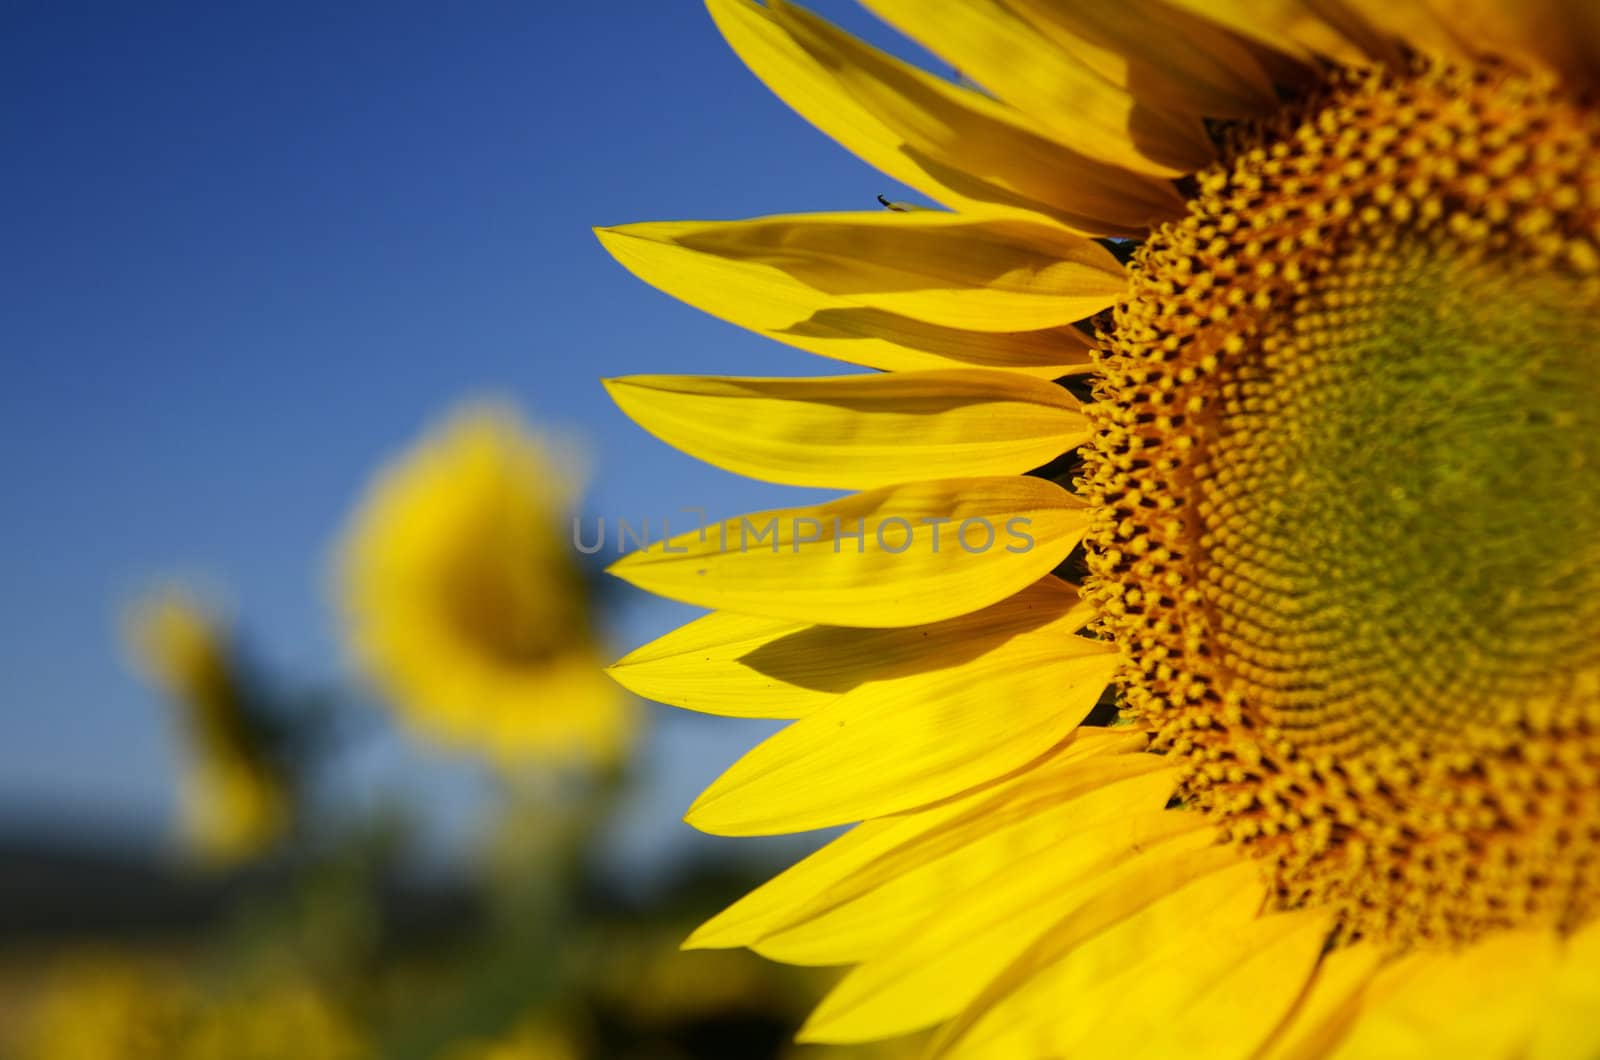 Sunflowers, with their warm color announce summer